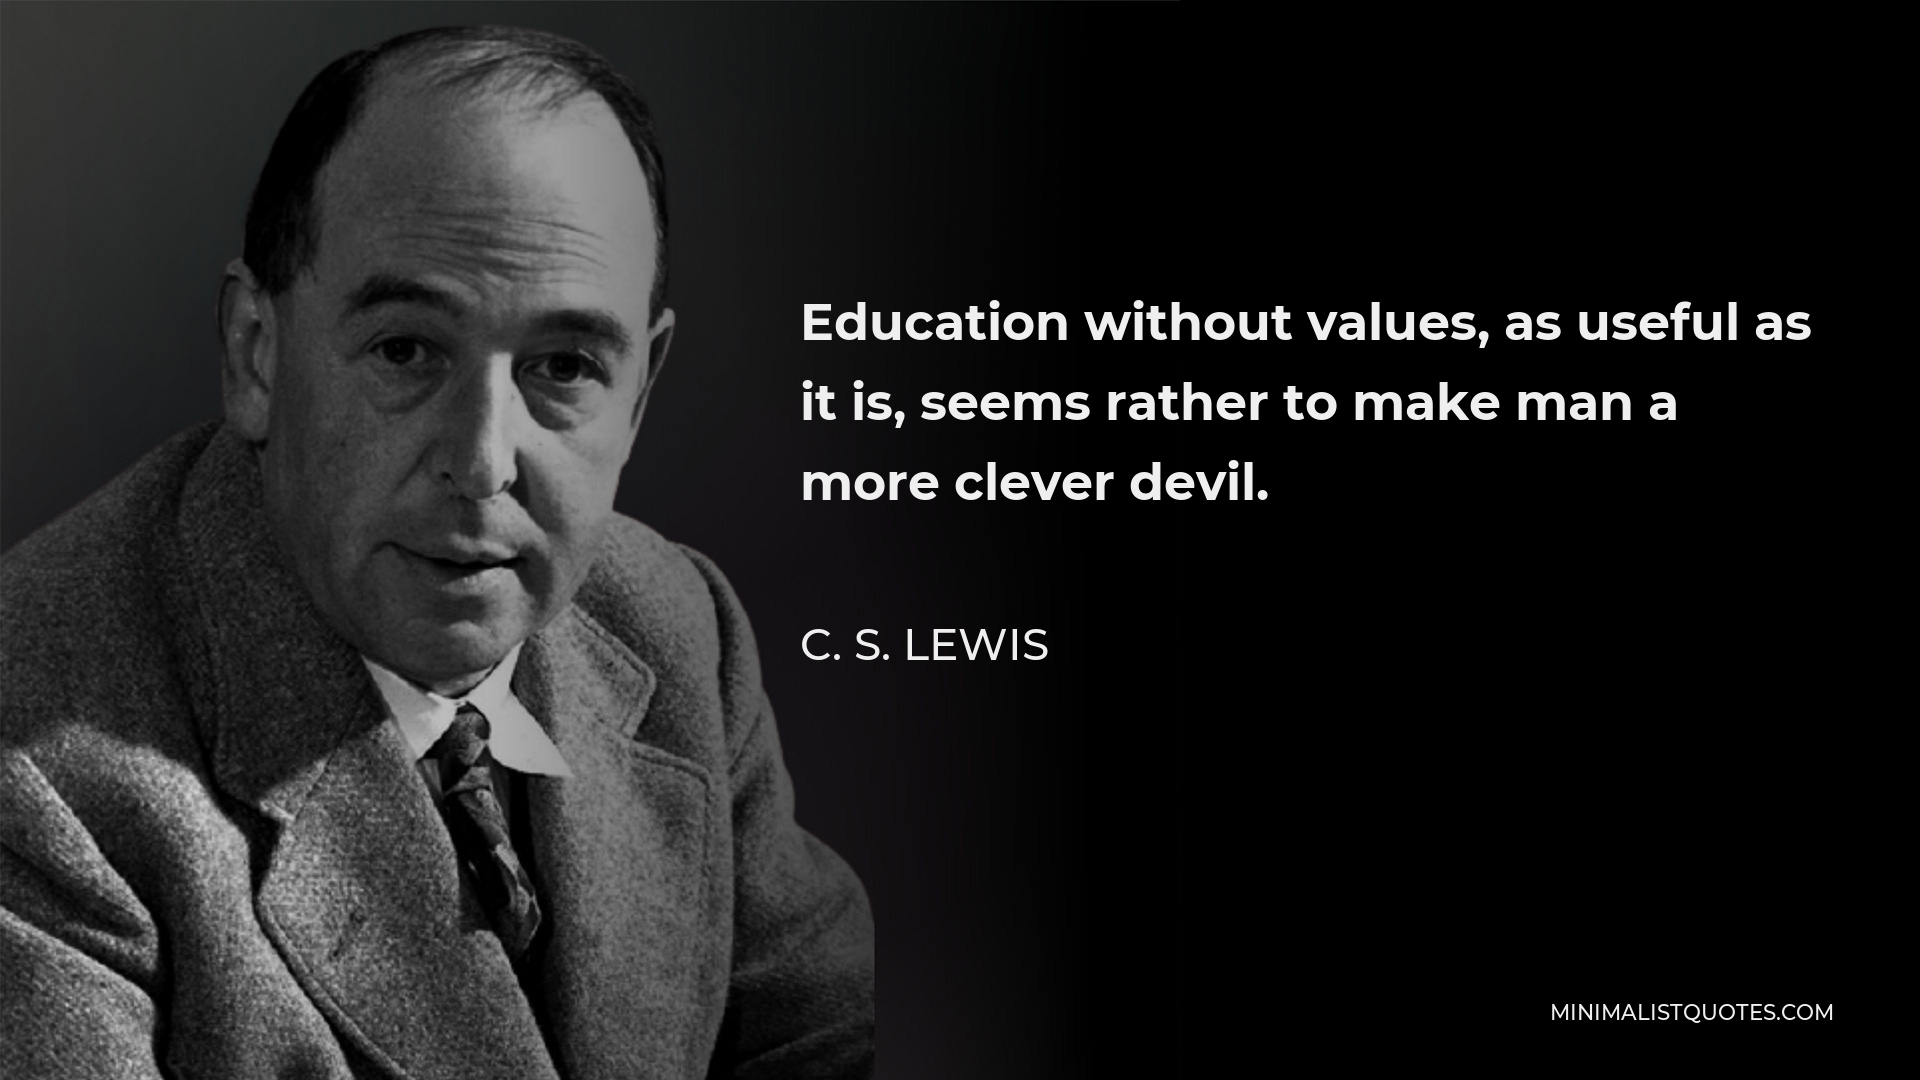 C. S. Lewis Quote - Education without values, as useful as it is, seems rather to make man a more clever devil.